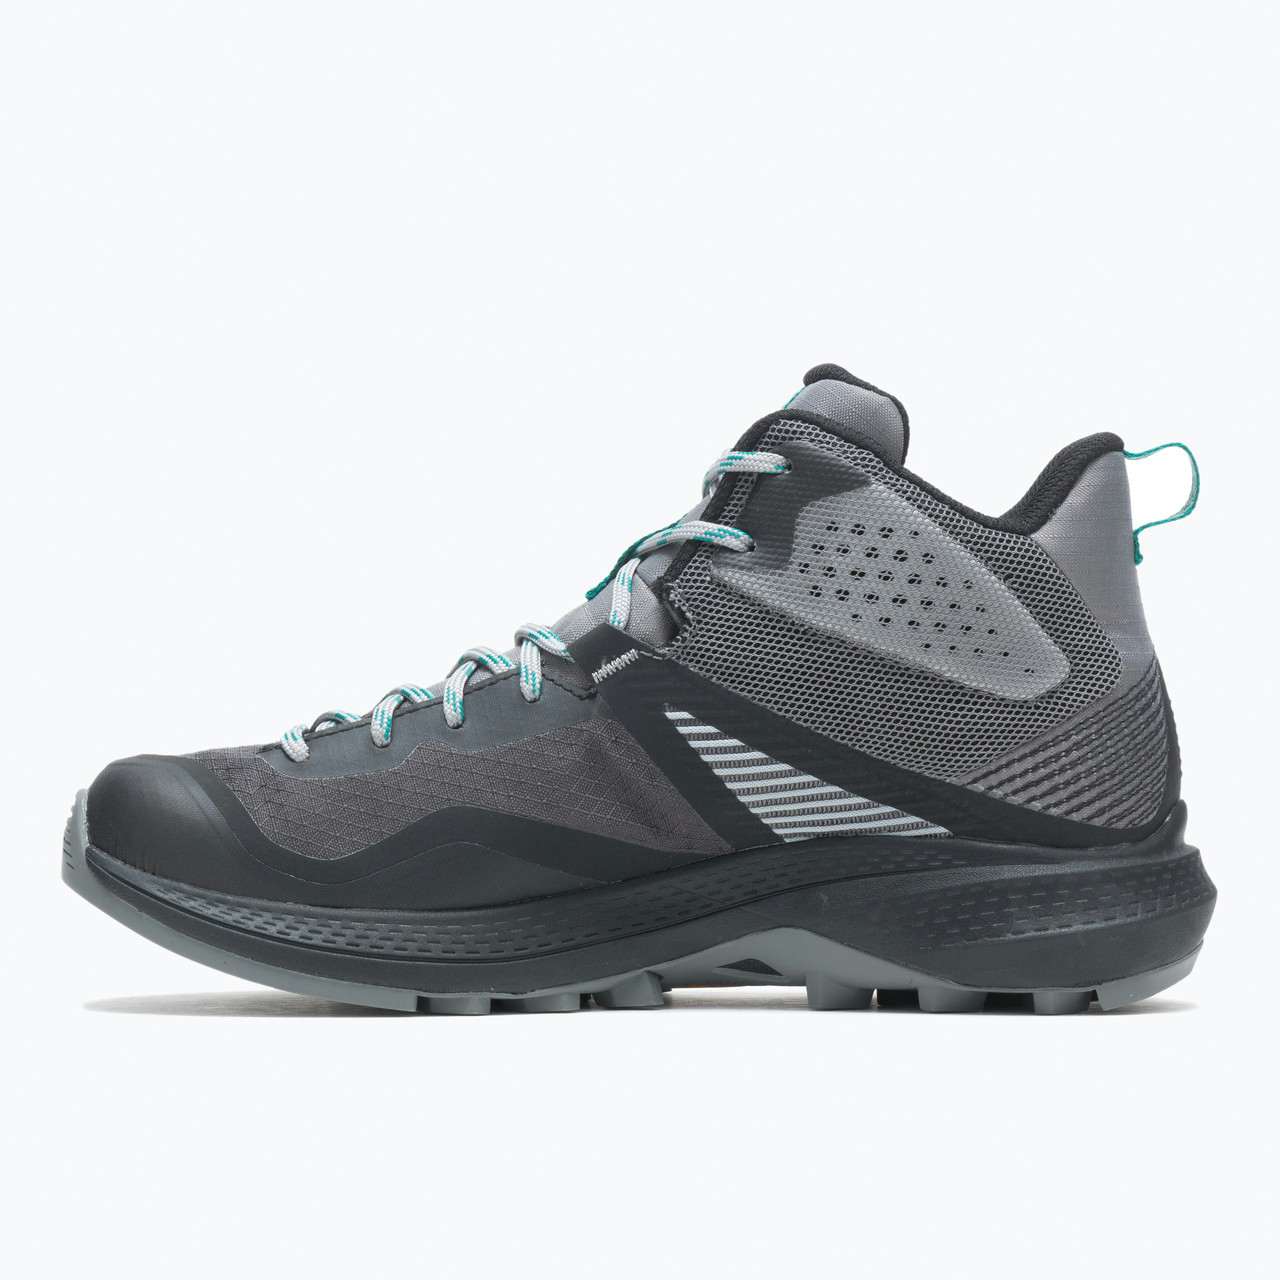 MQM 3 Mid Gore-Tex Light Trail Shoes Charcoal/Teal